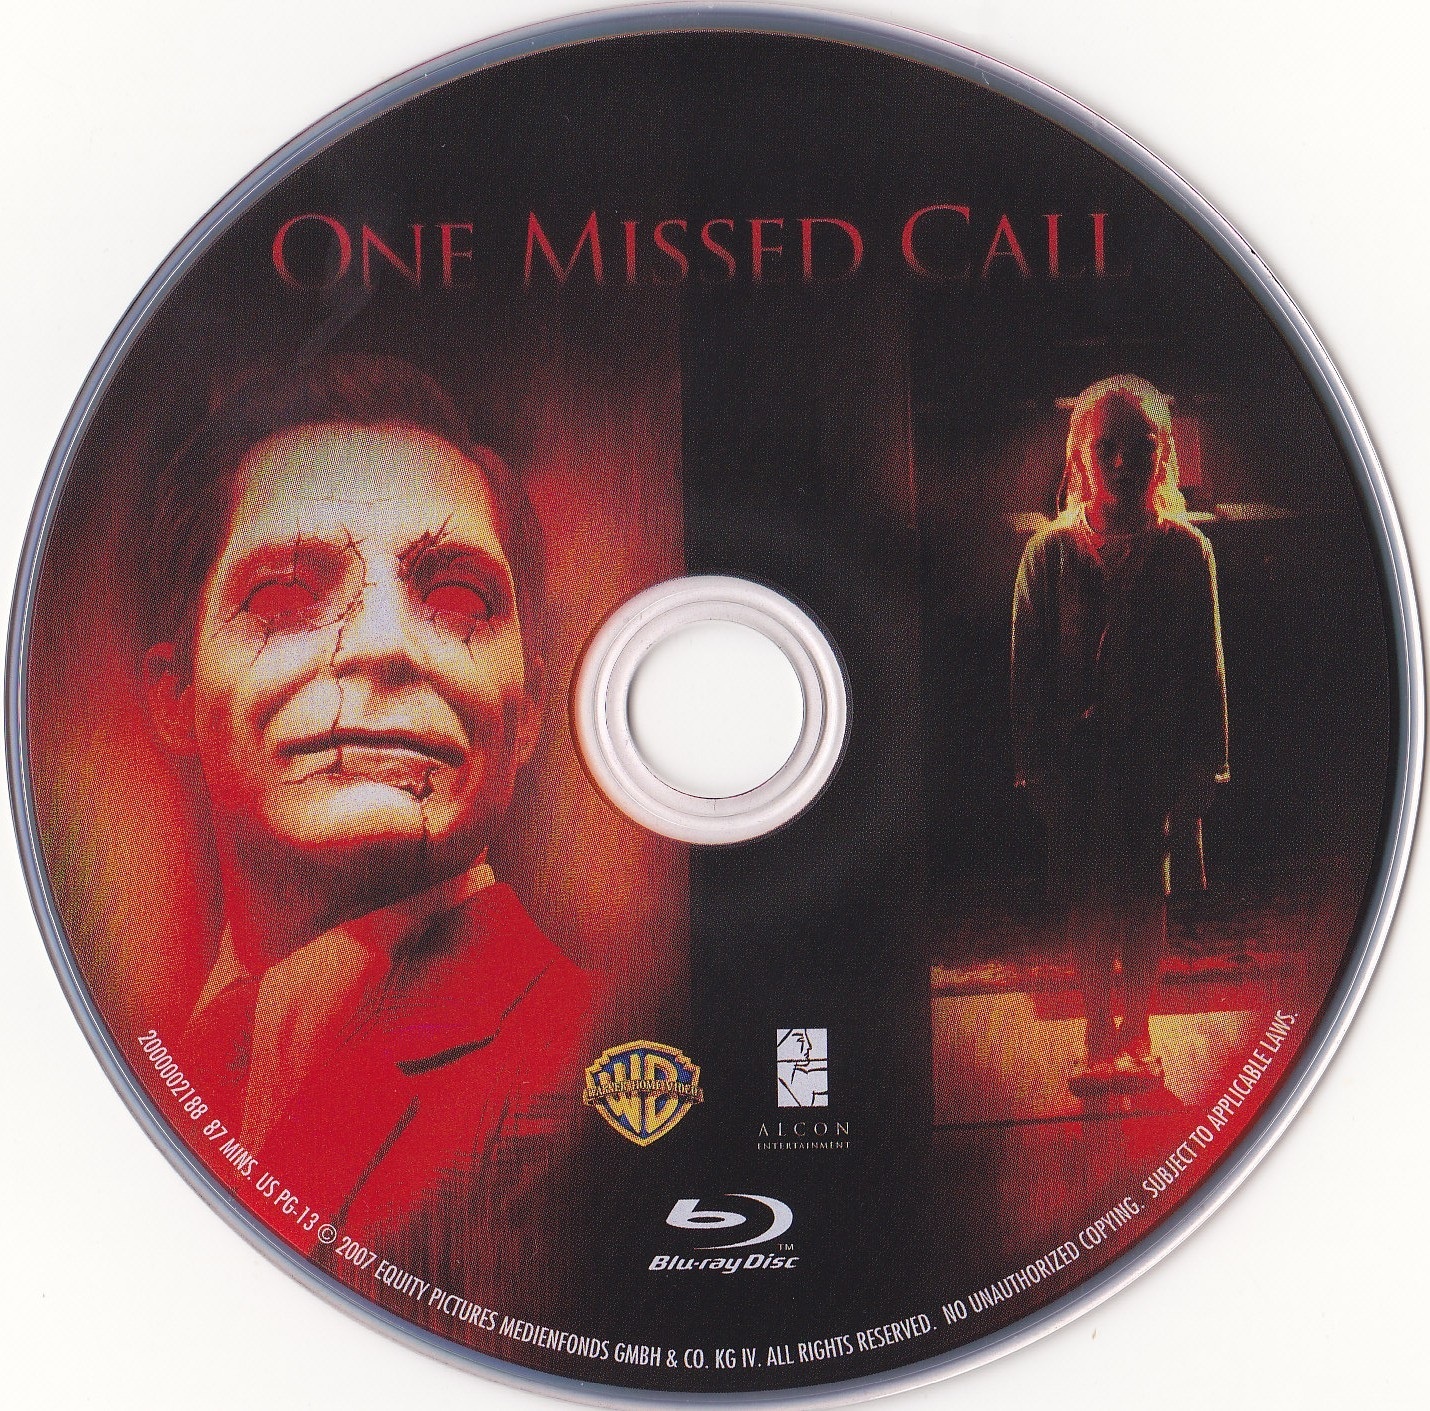 One Missed Call (BLU-RAY)